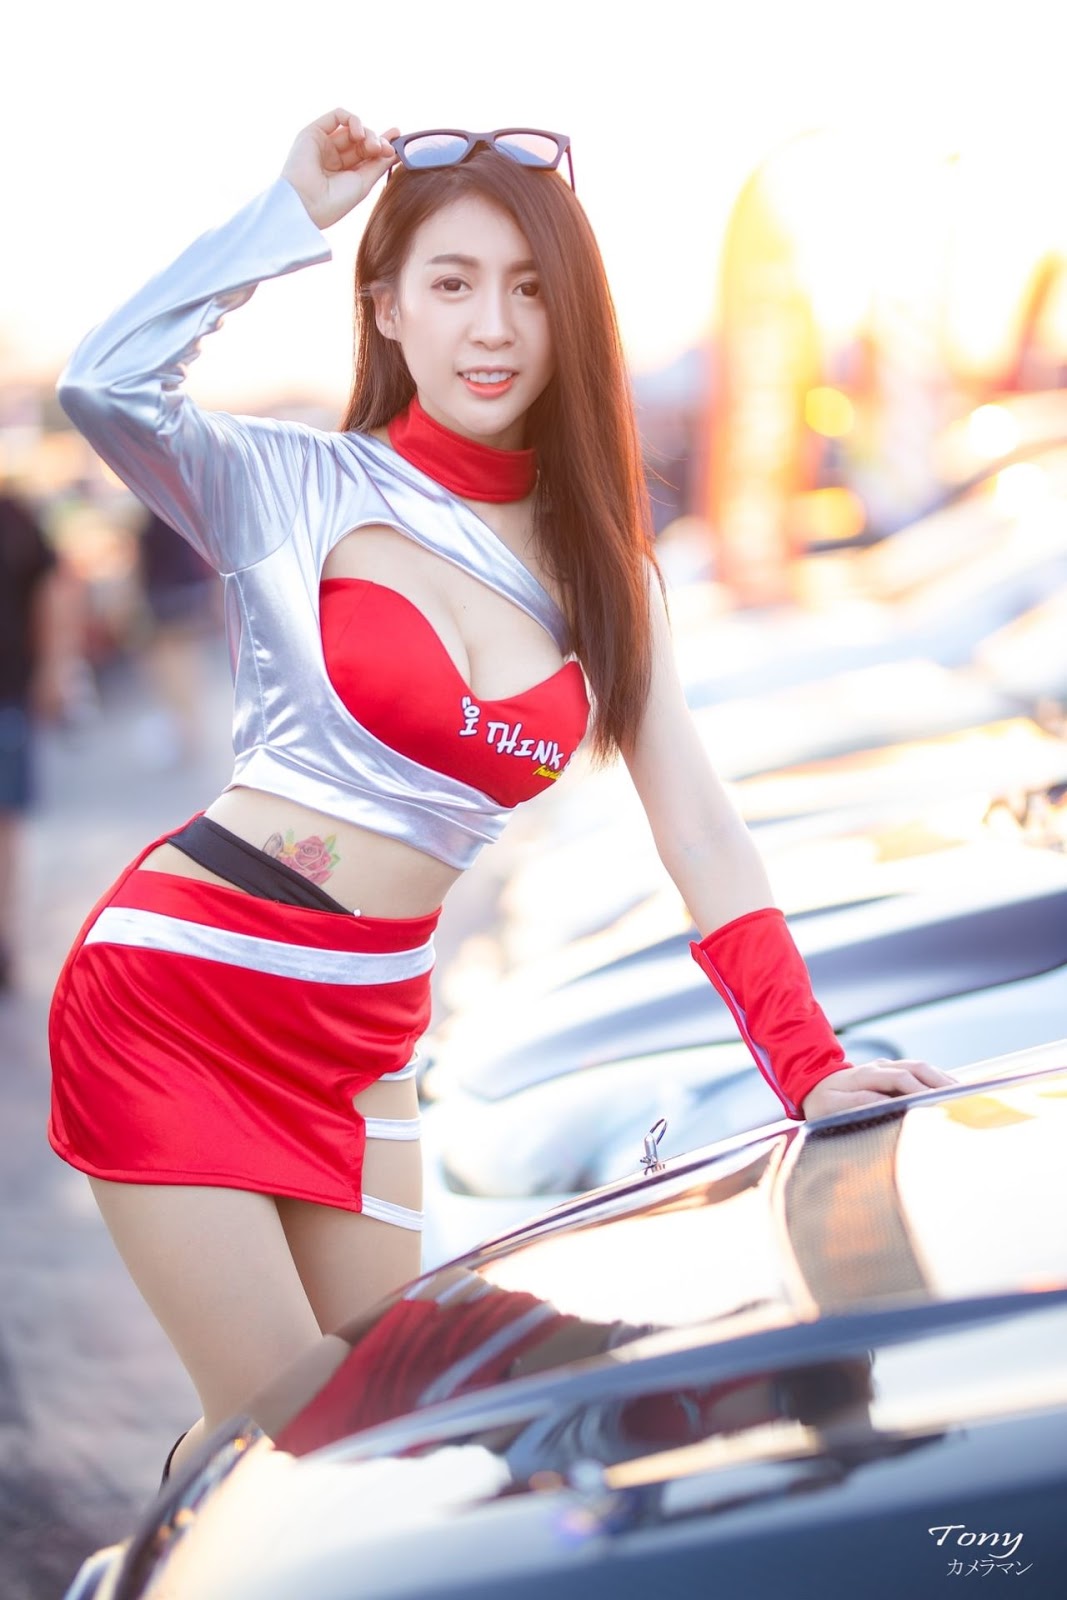 Image-Thailand-Hot-Model-Thai-Racing-Girl-At-Pathum-Thani-Speedway-TruePic.net- Picture-58